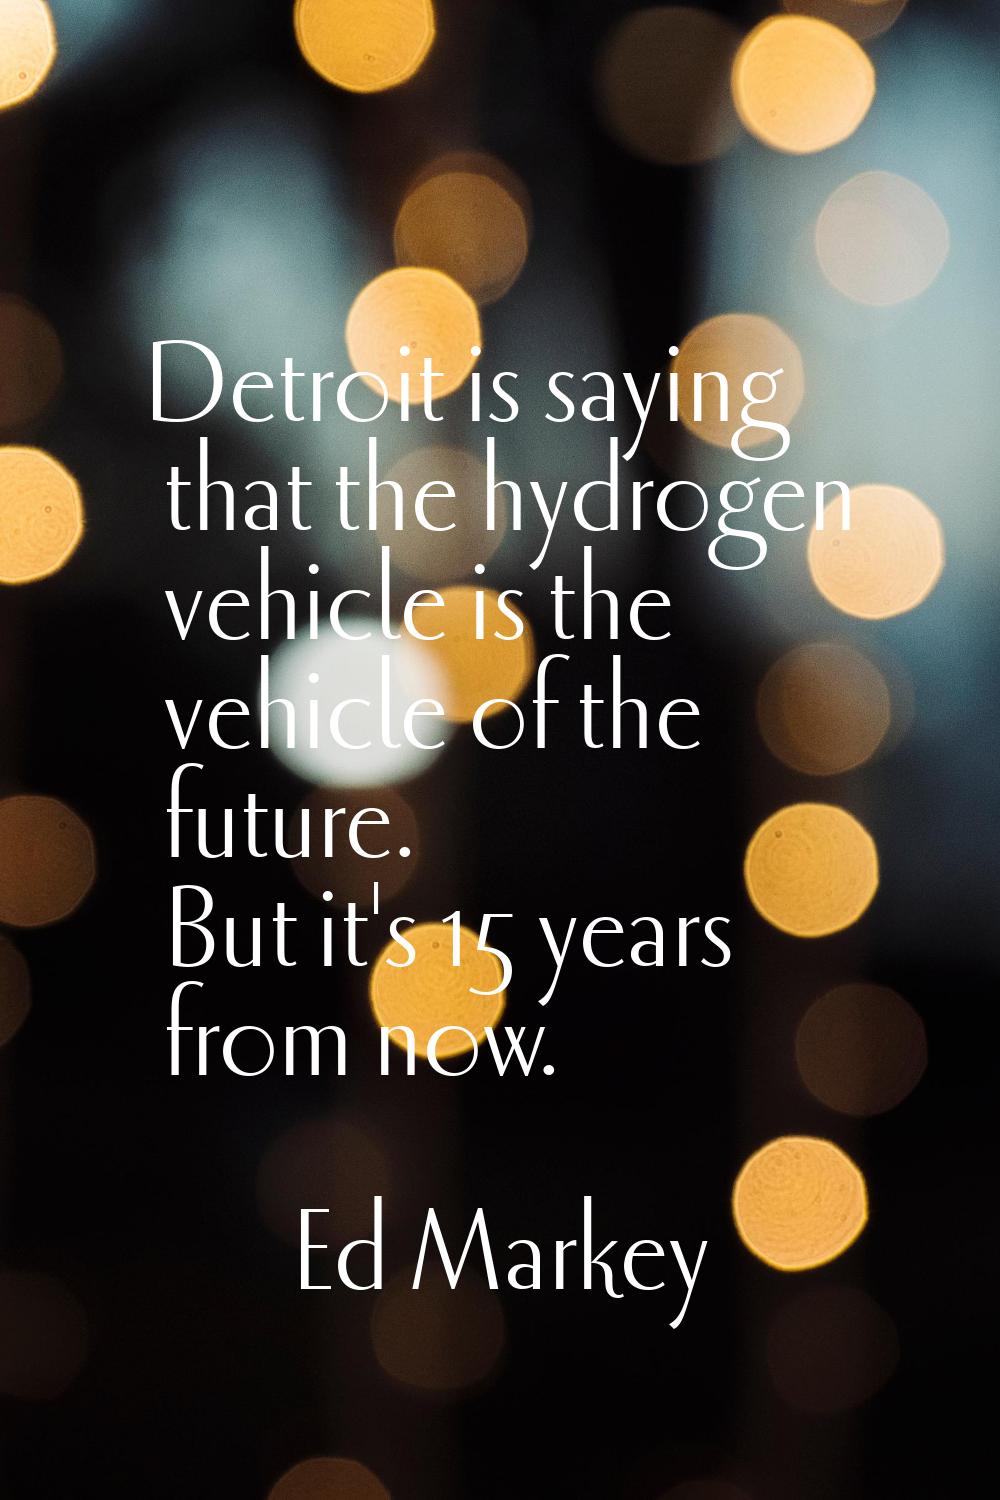 Detroit is saying that the hydrogen vehicle is the vehicle of the future. But it's 15 years from no